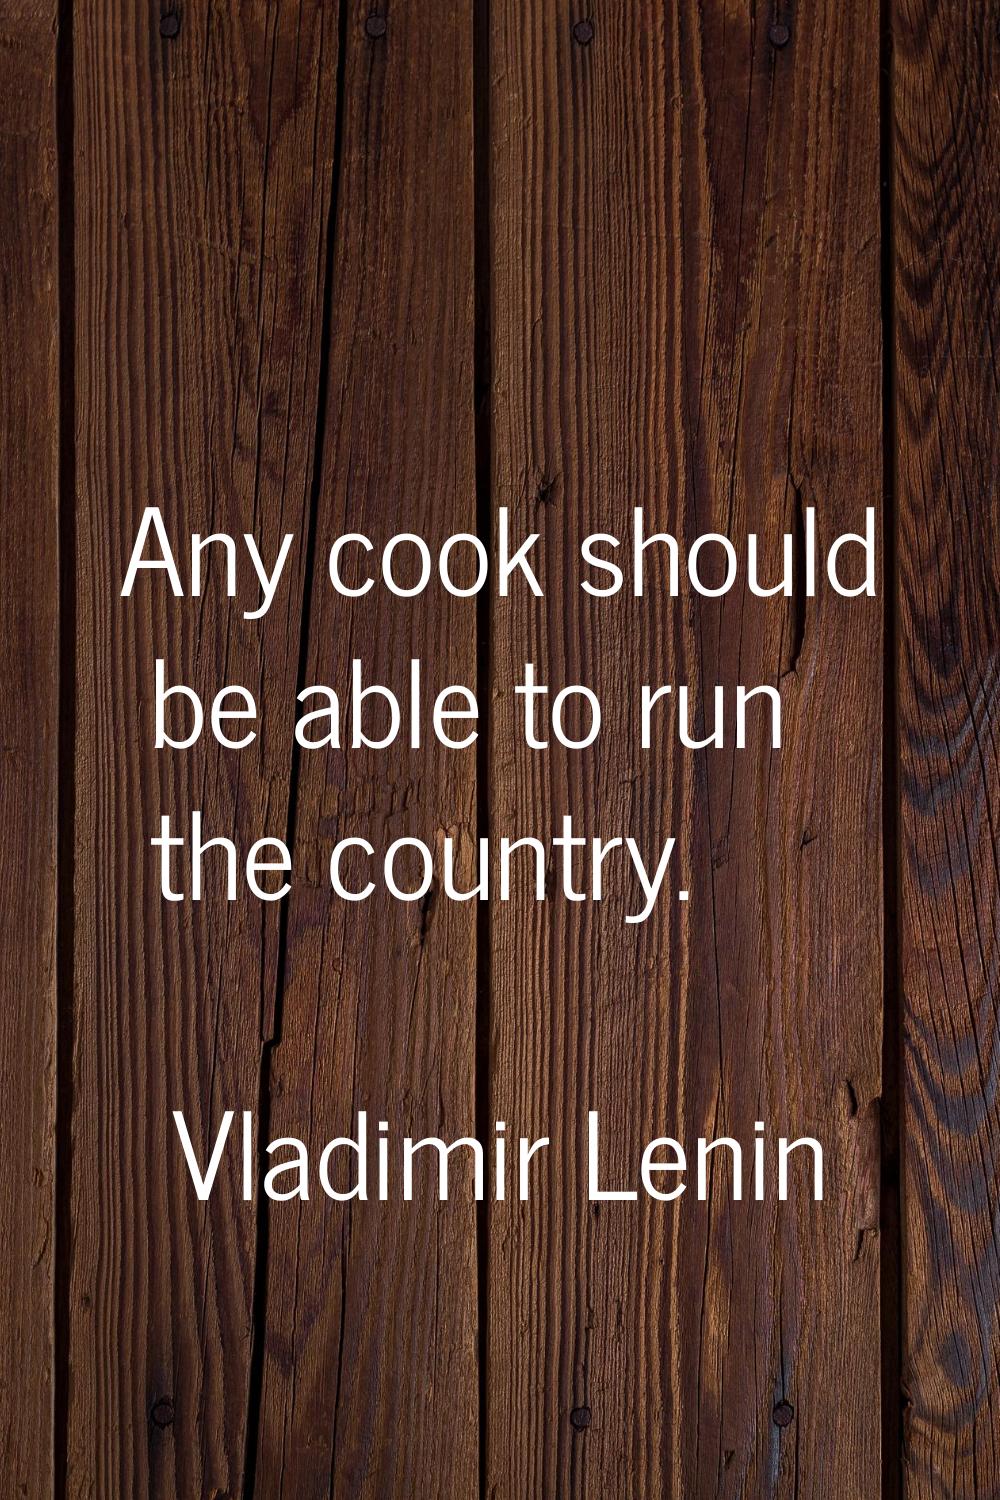 Any cook should be able to run the country.